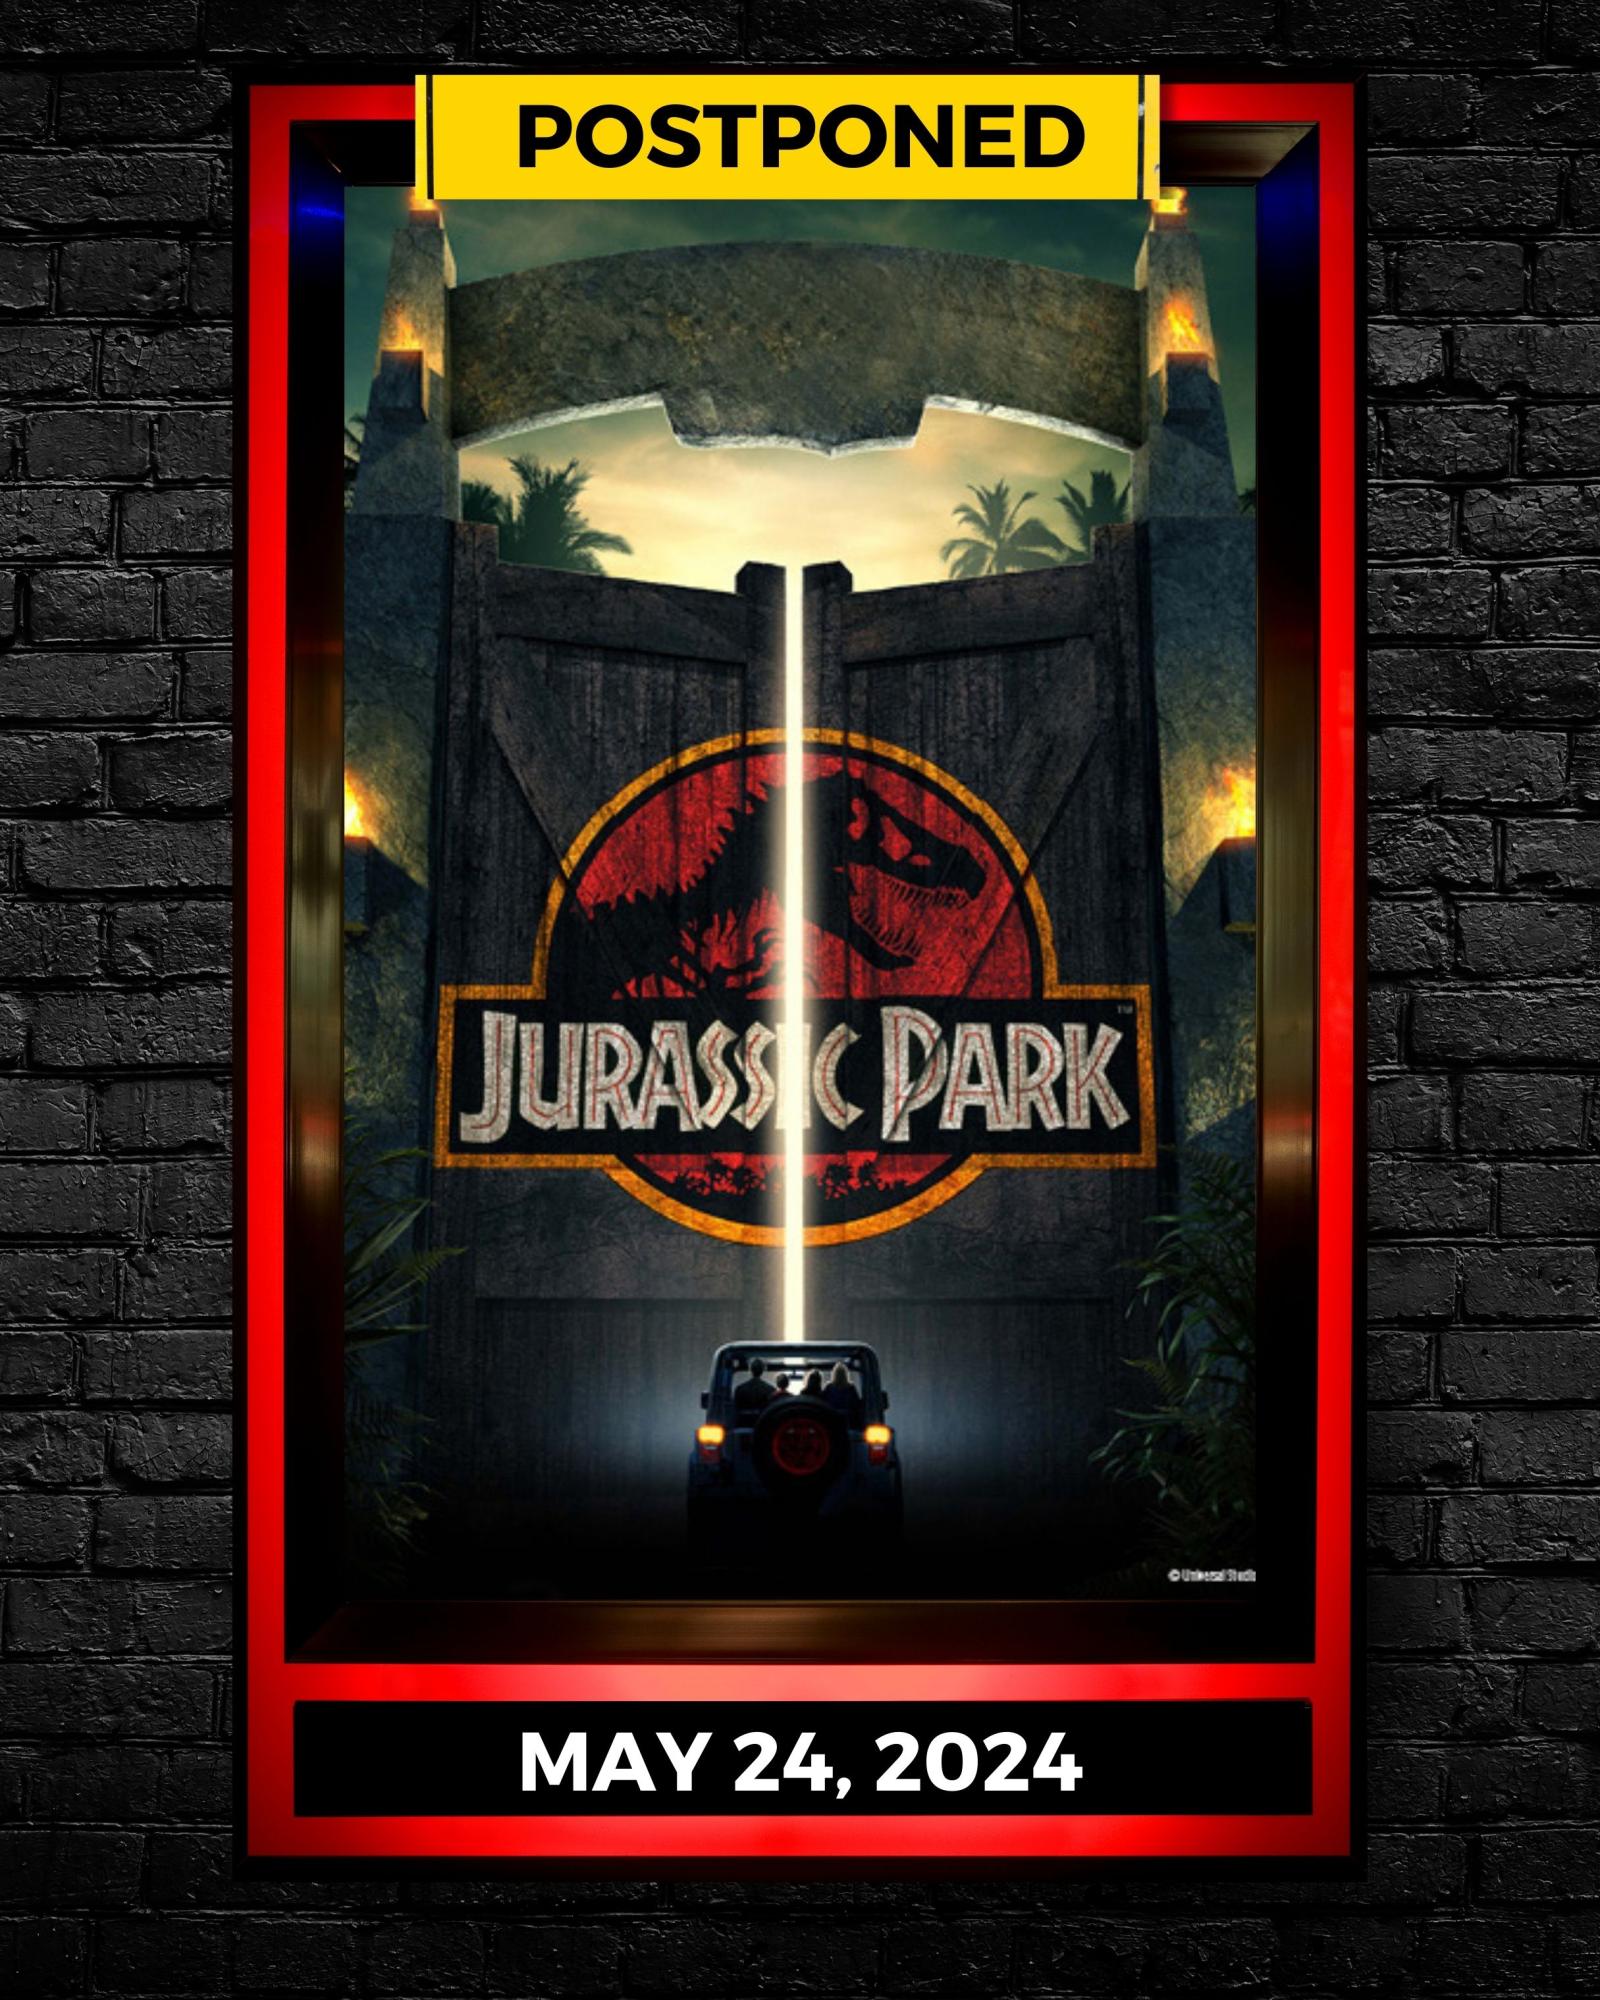 Starlight Movie Night showing of Jurassic Park (1993) postponed until May 24 due to weather.